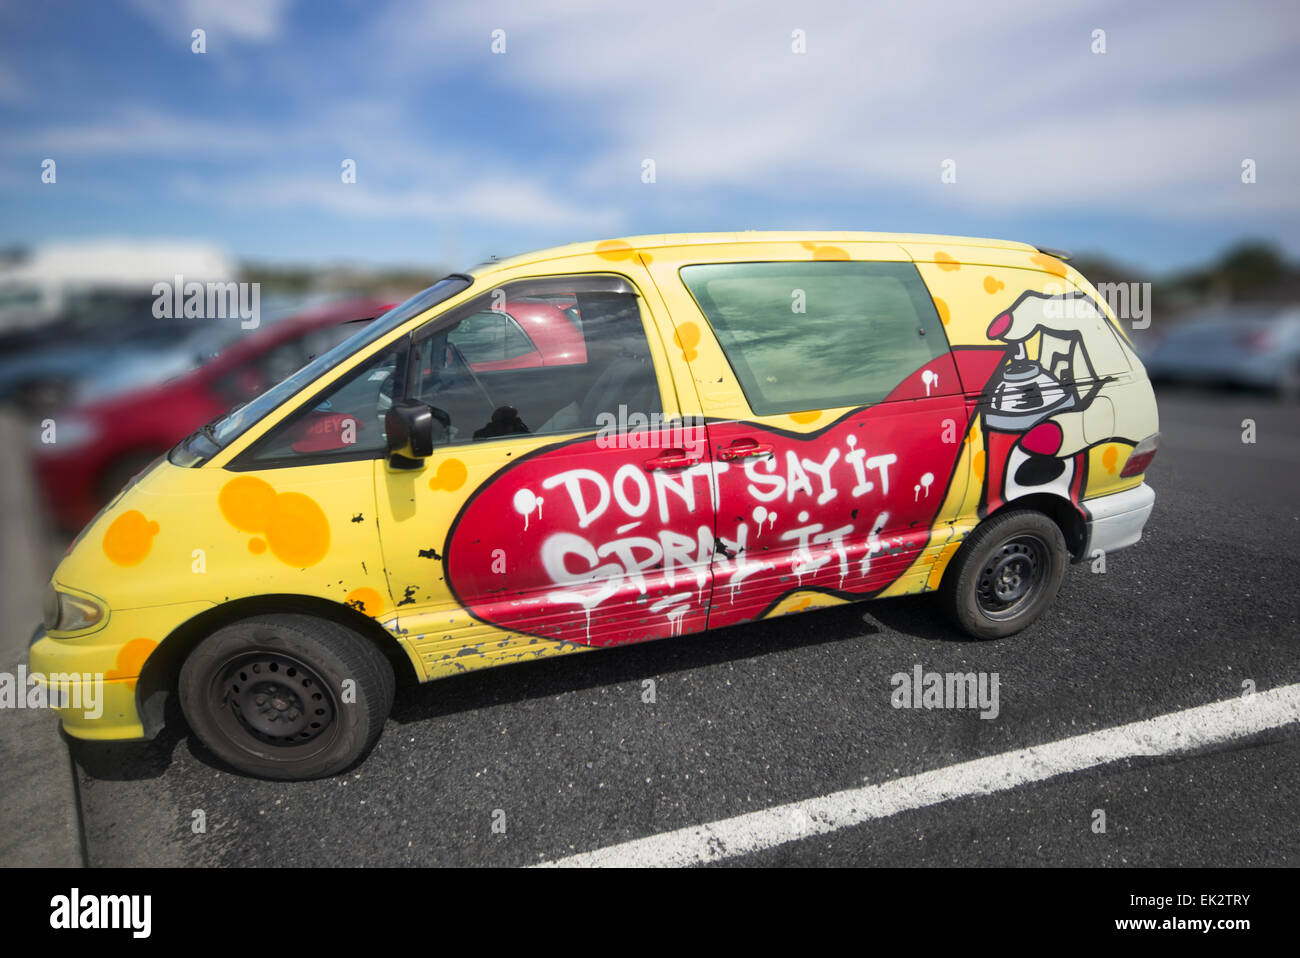 'Don't say it spray it' hire car in New Zealand. Stock Photo